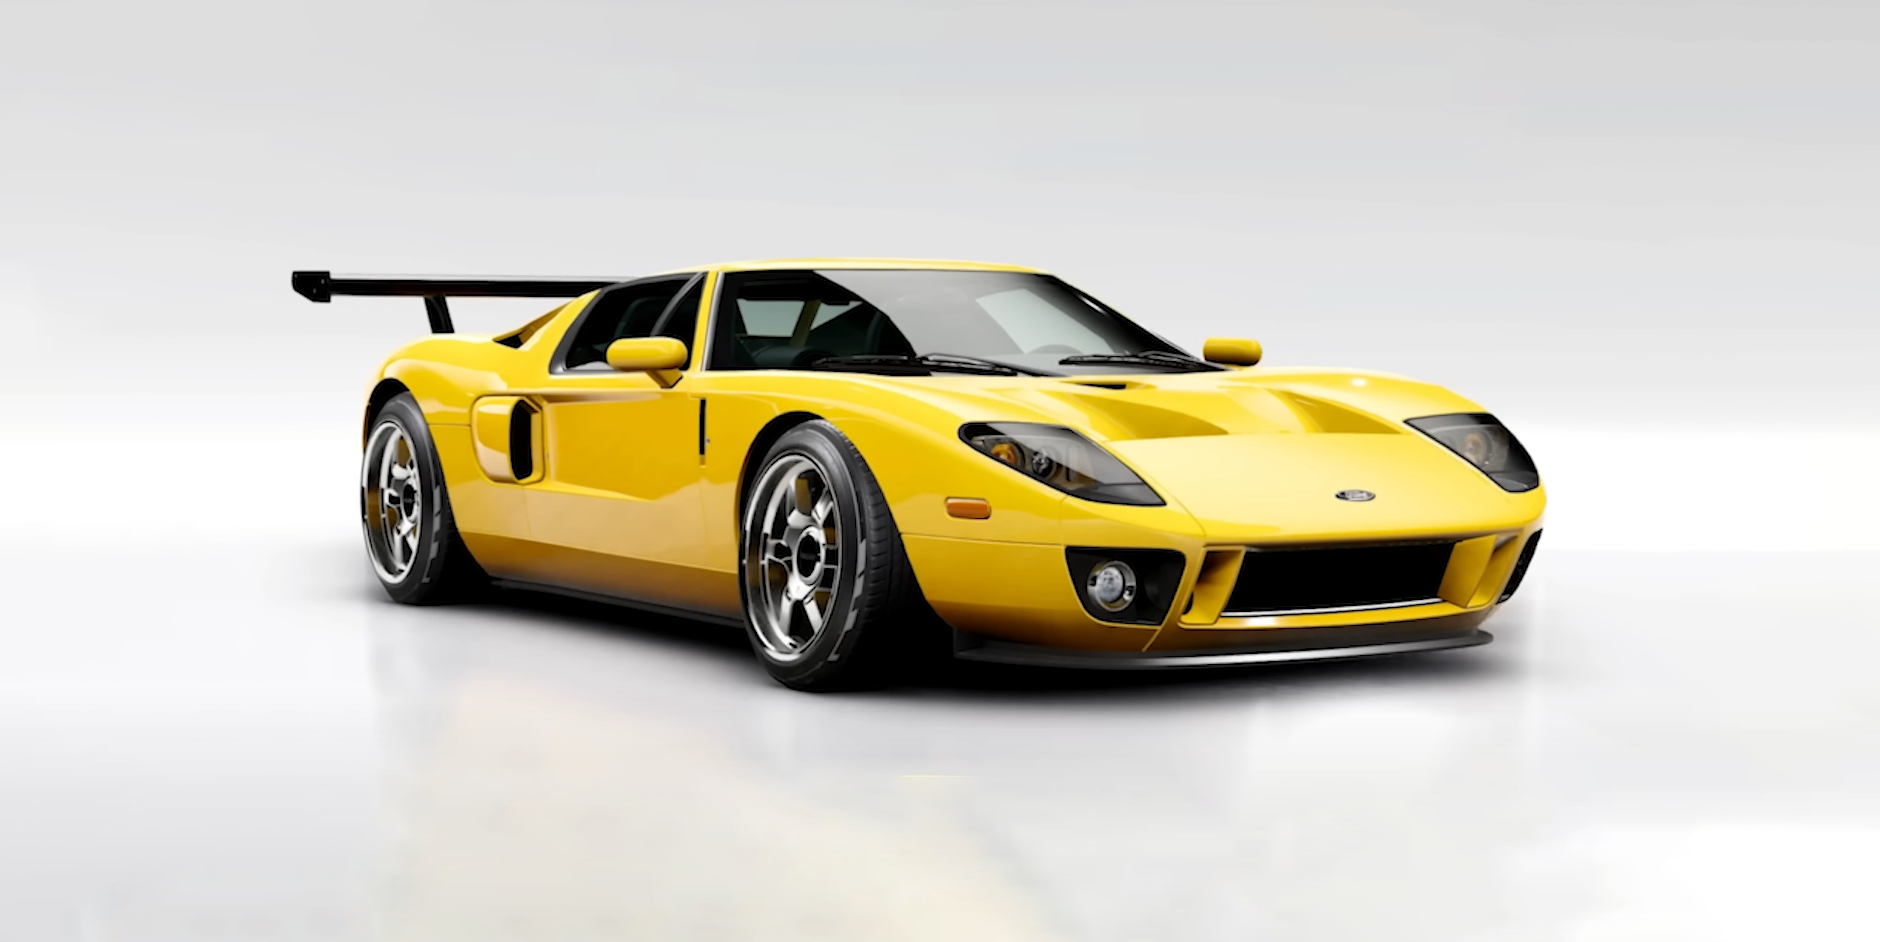 Ford GT - Wikipedia